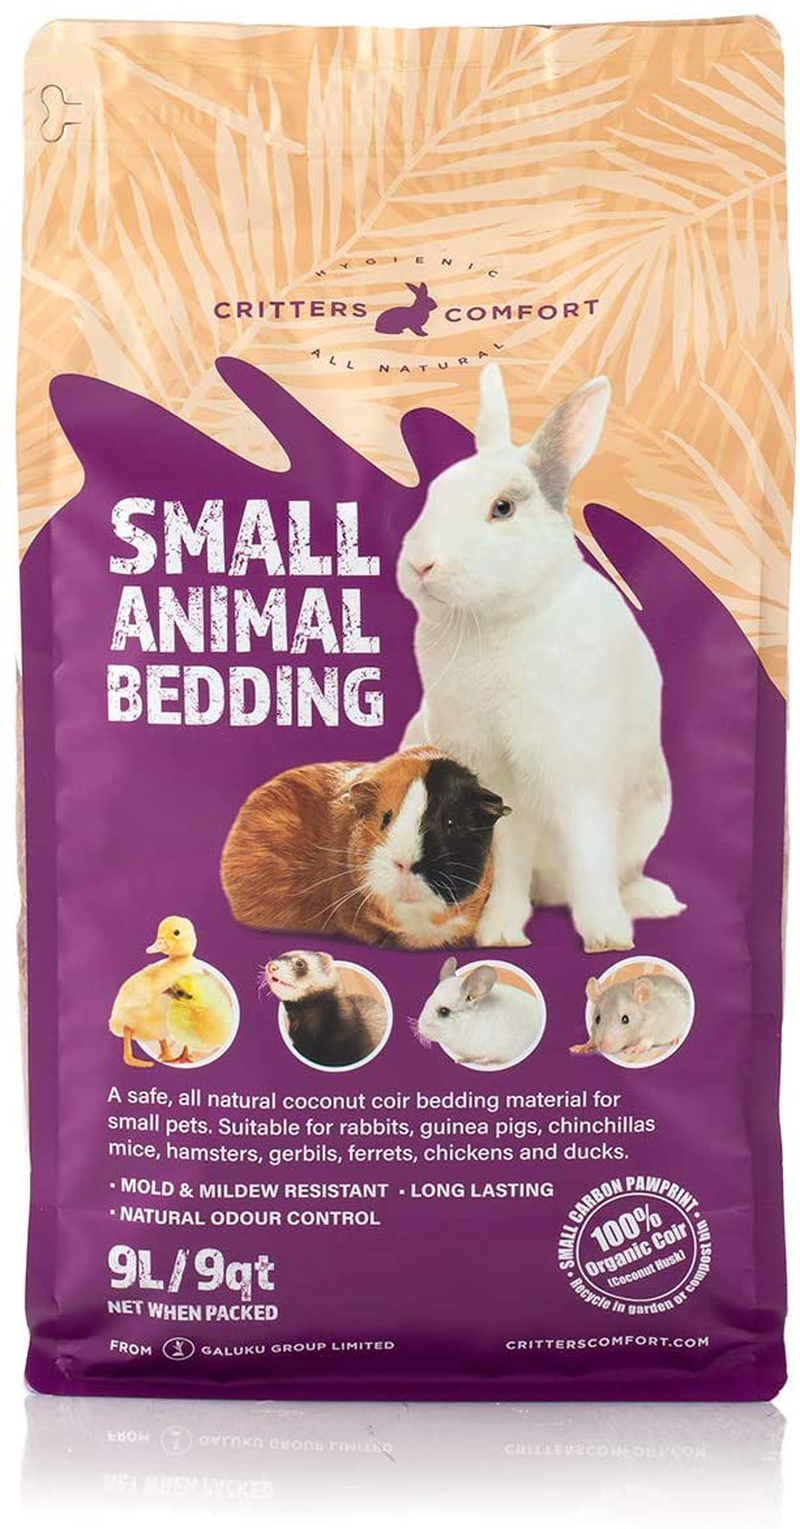 Bunny Bedding Odor Control for Small Pets - Organic Coconut Husk Fiber Substrate Animal Bedding for Guinea Pig, Ferret, Hamster Cages and Habitats - Pet Accessories - 9 Liters Critter Litter